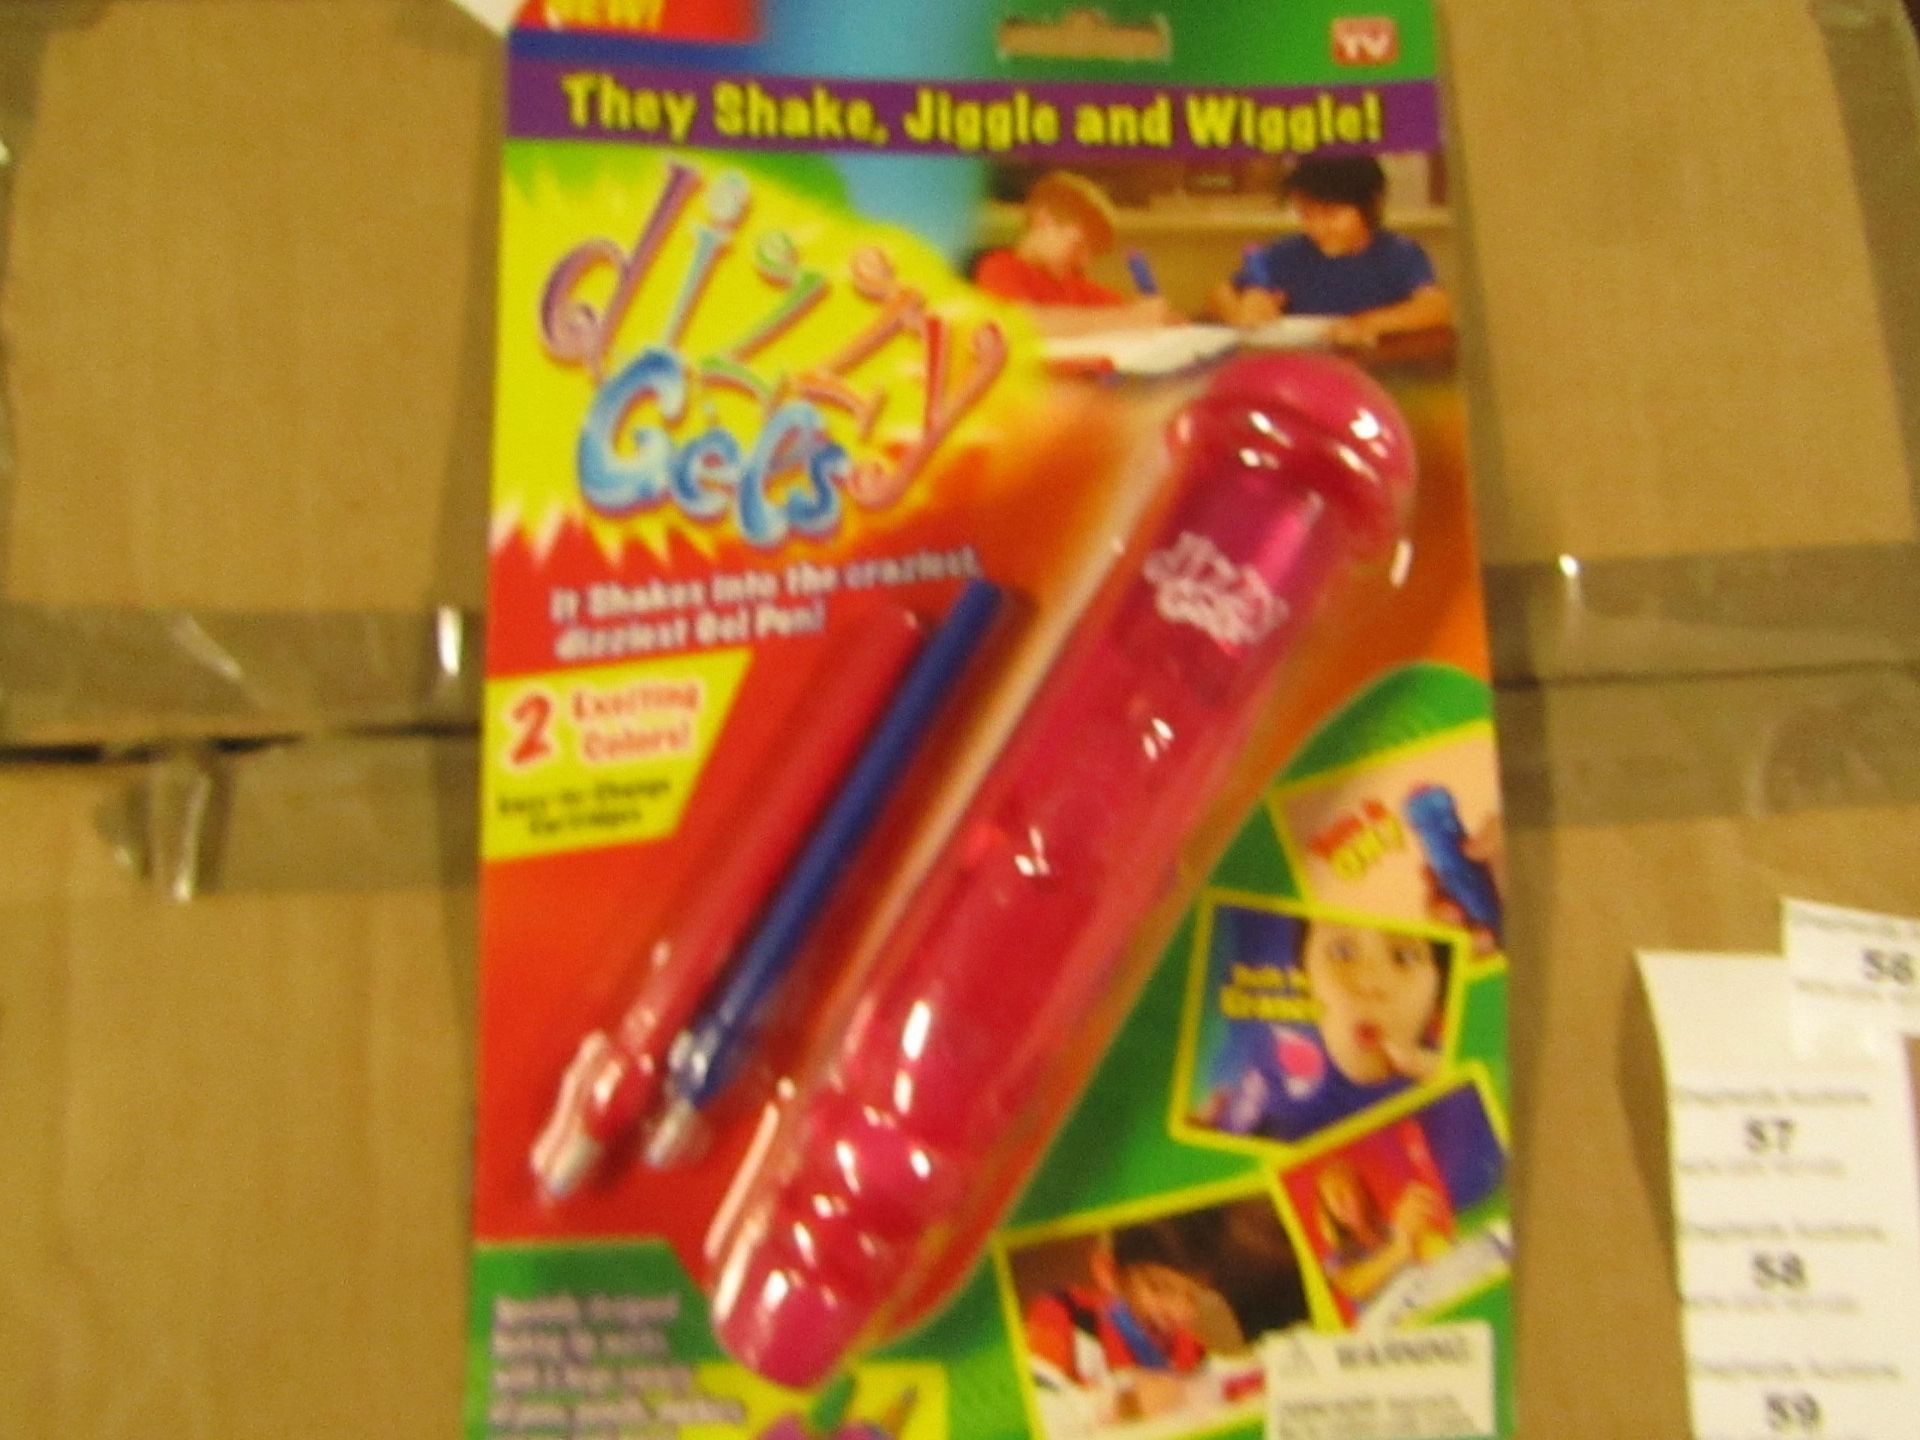 12x Dizzy gels, new and boxed.